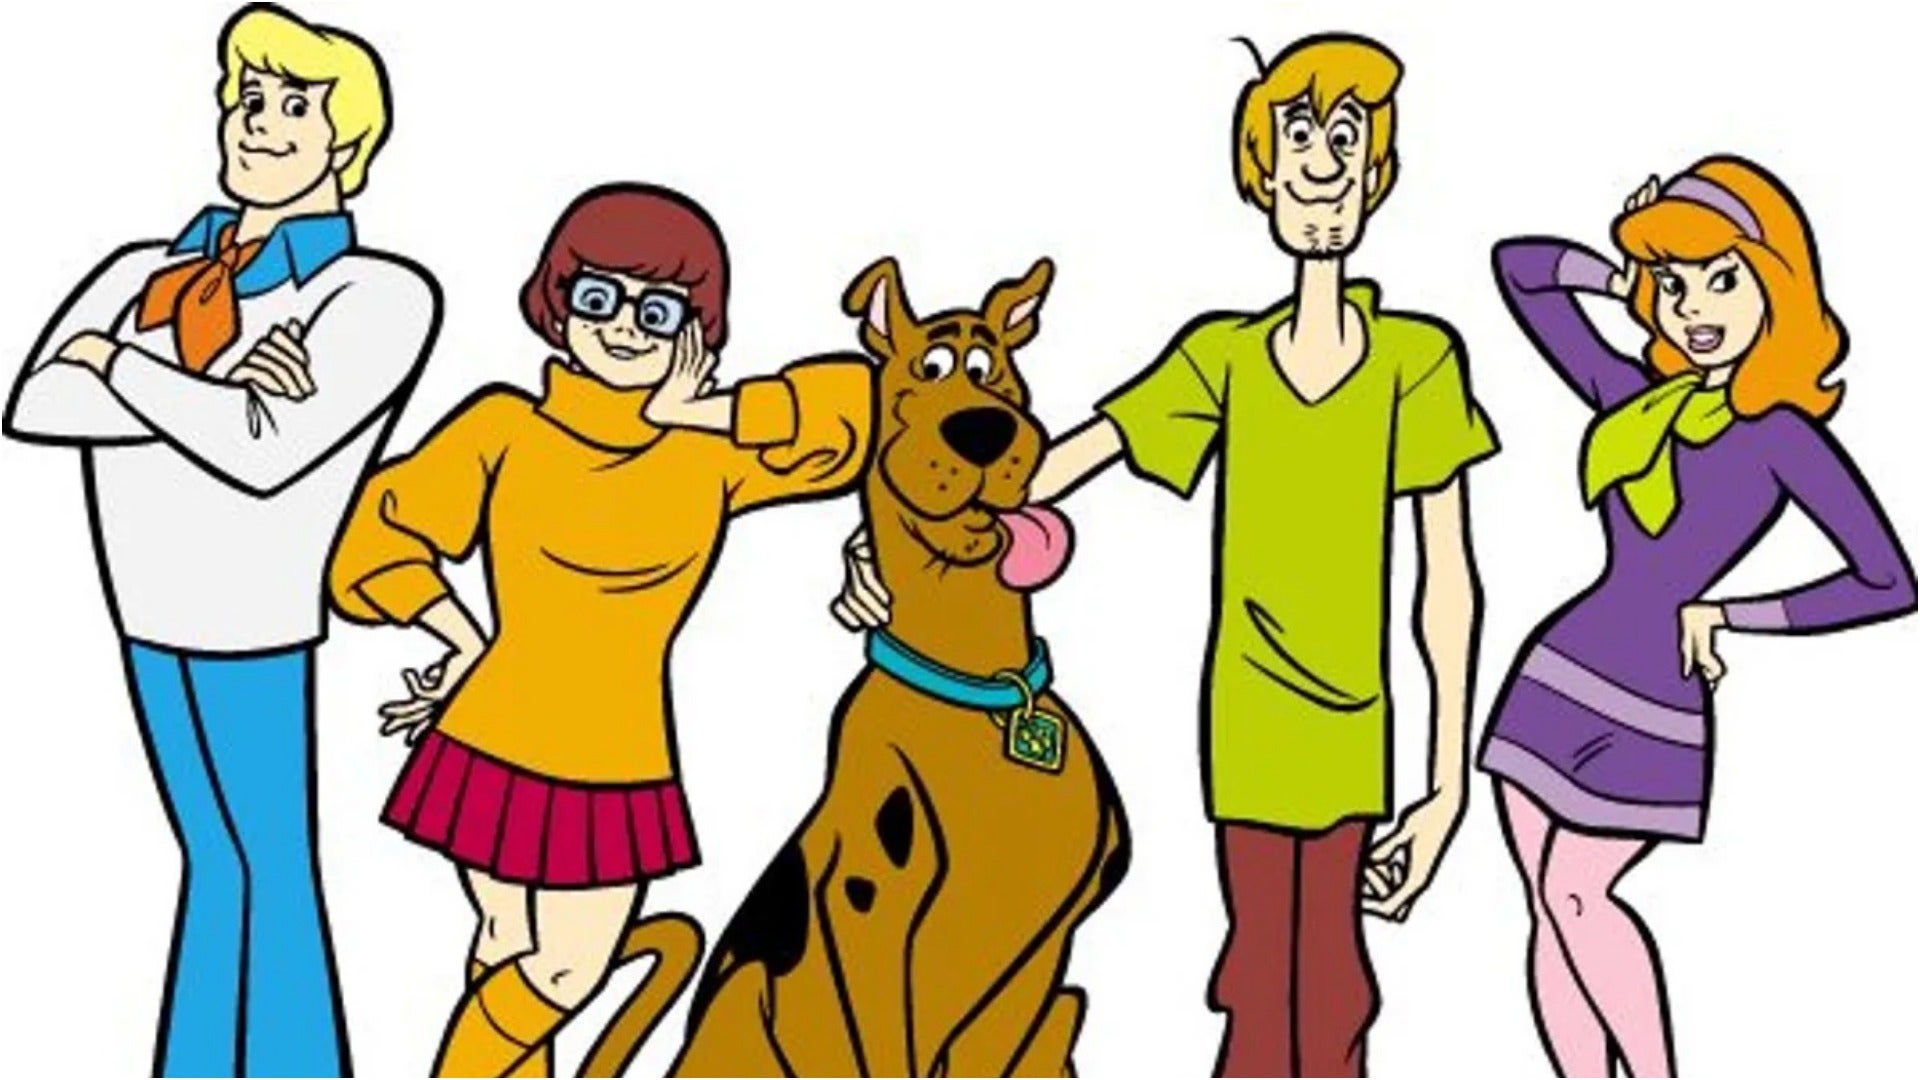 How To Make A Scooby Doo Cosplay For Halloween | Cosplay Central